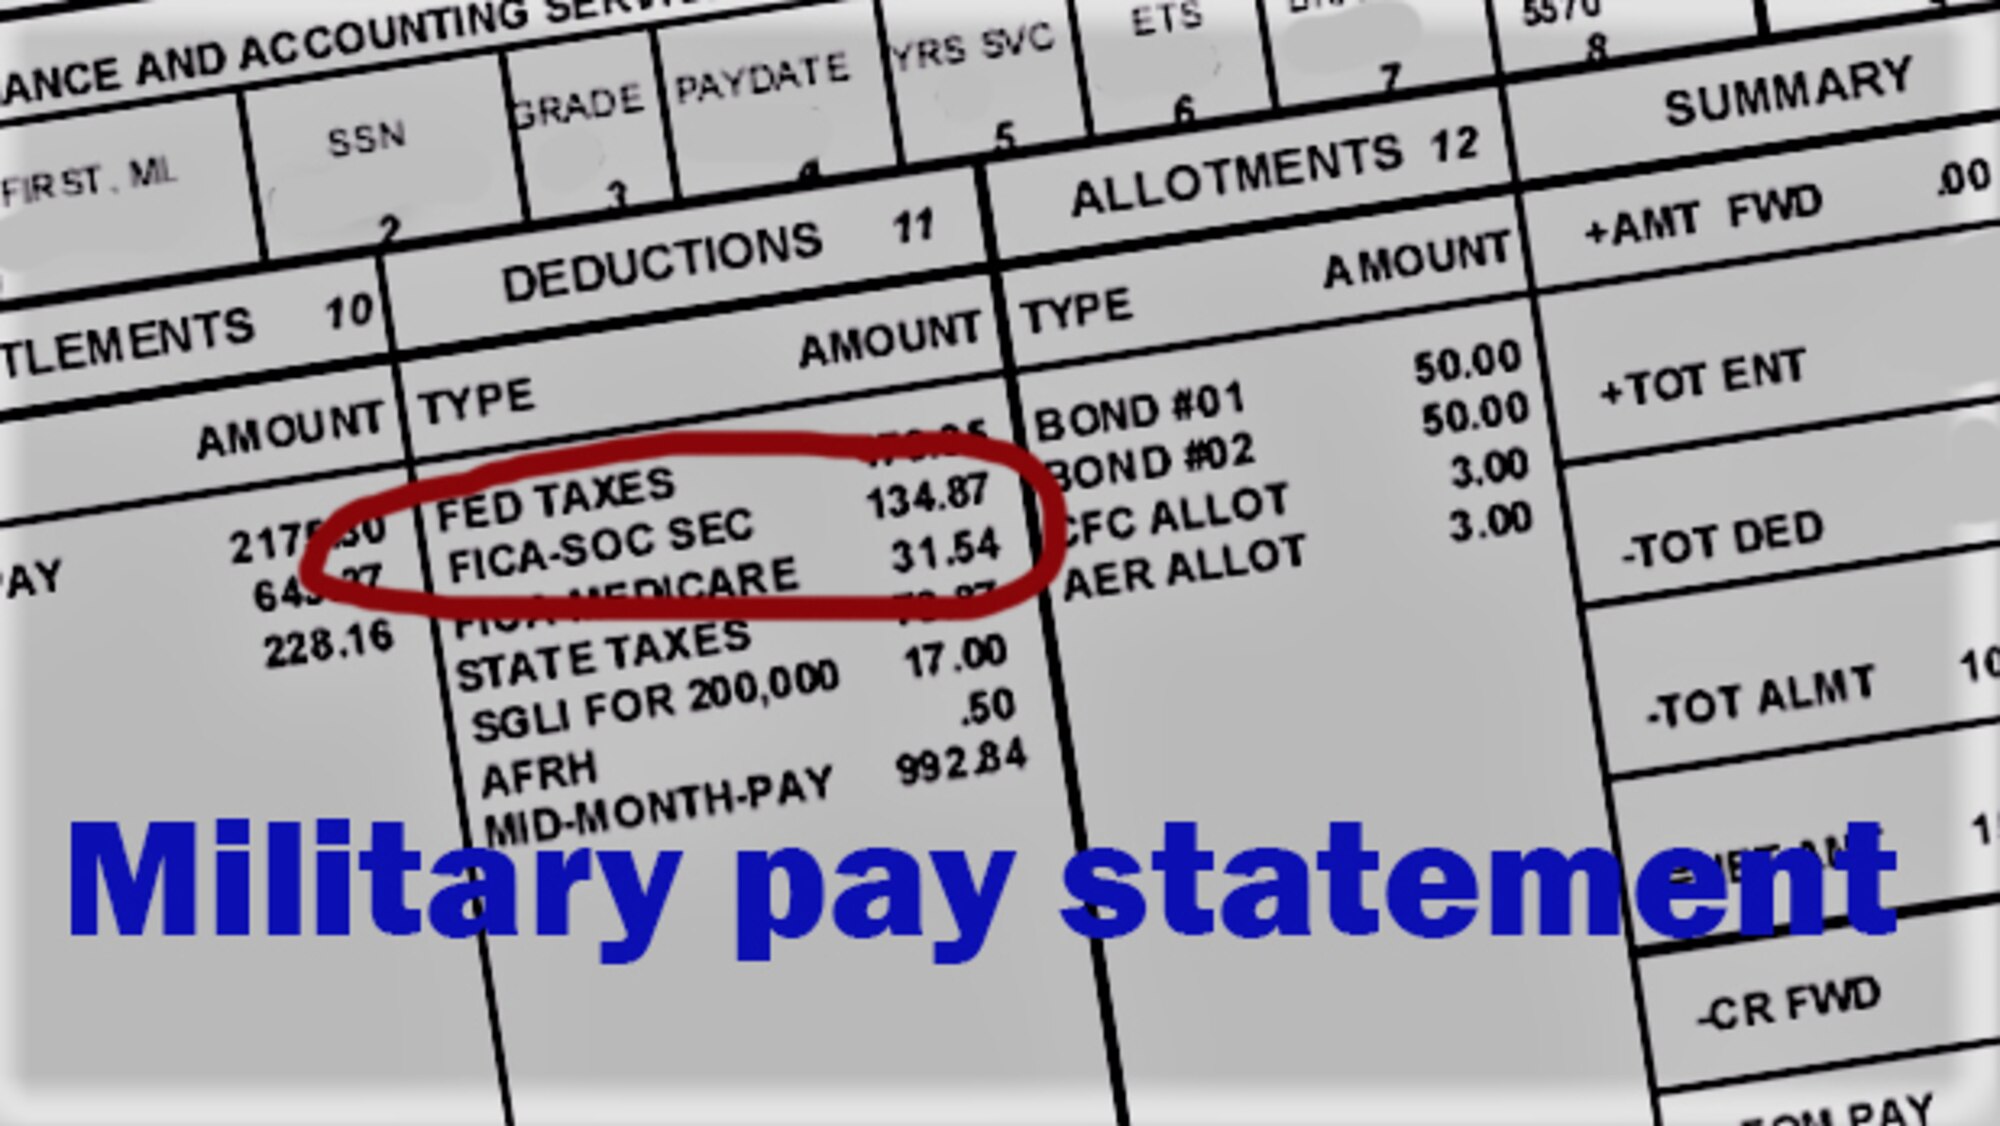 Illustration to show location of Social Security taxes on military pay statements